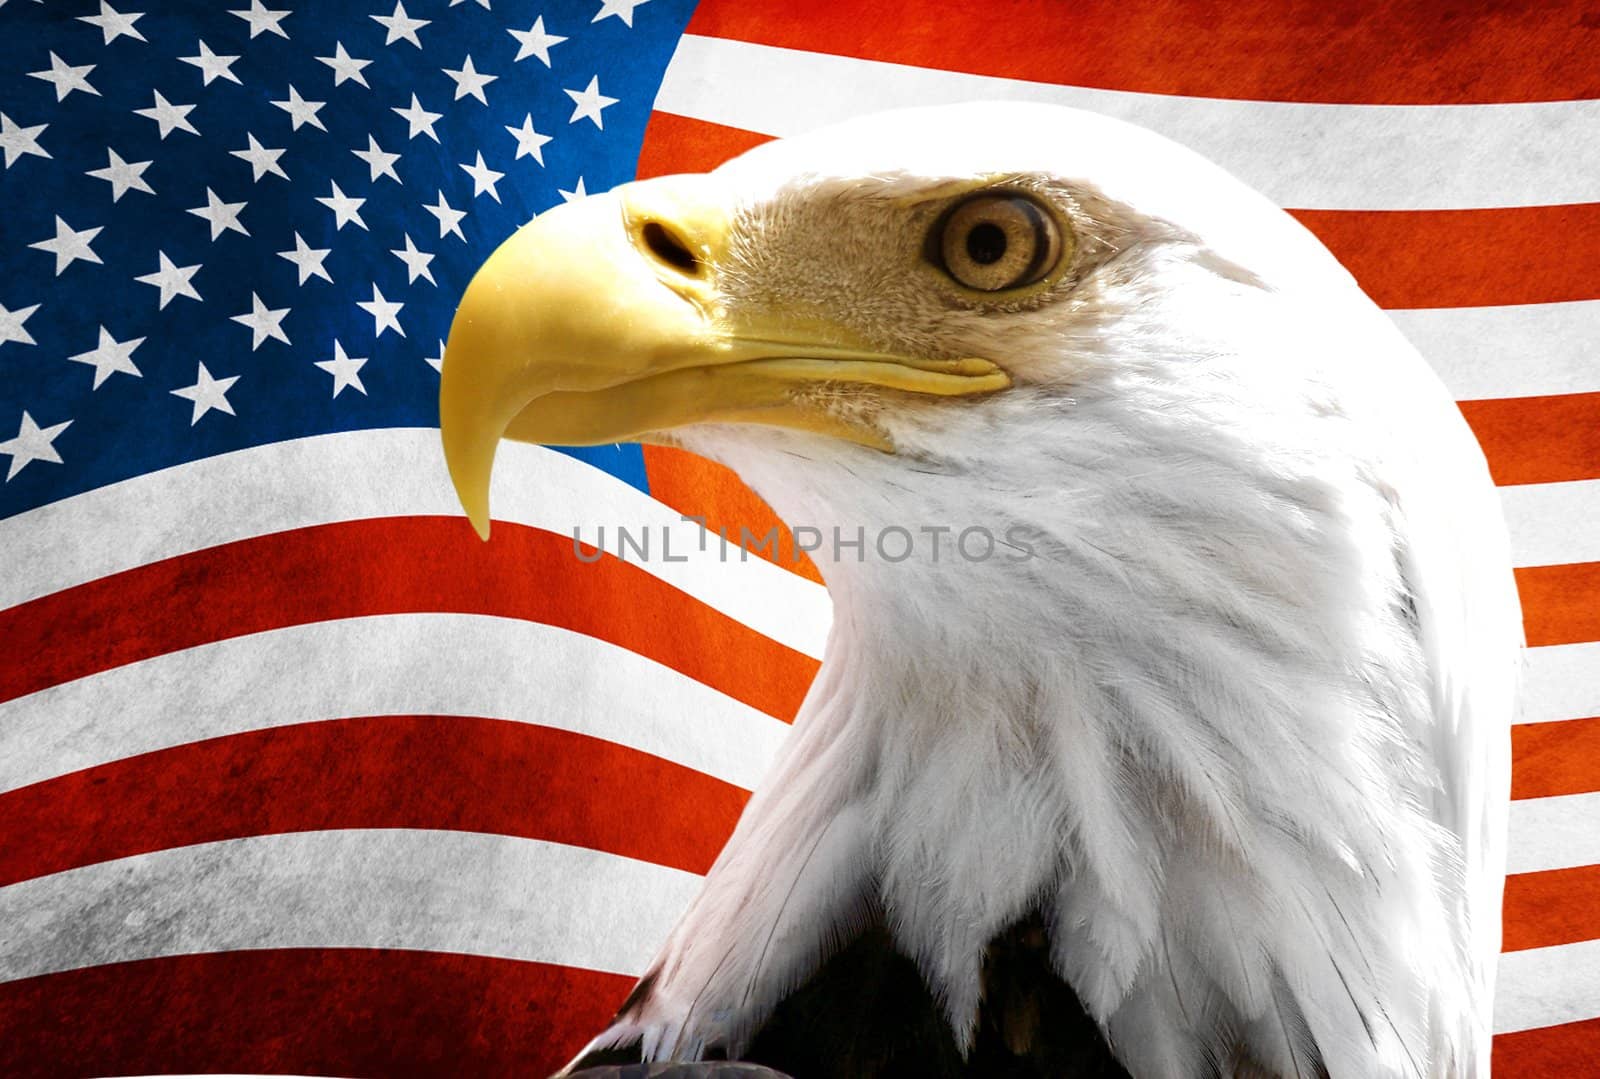 Eagle in the foreground with the American flag blurred by shutswis